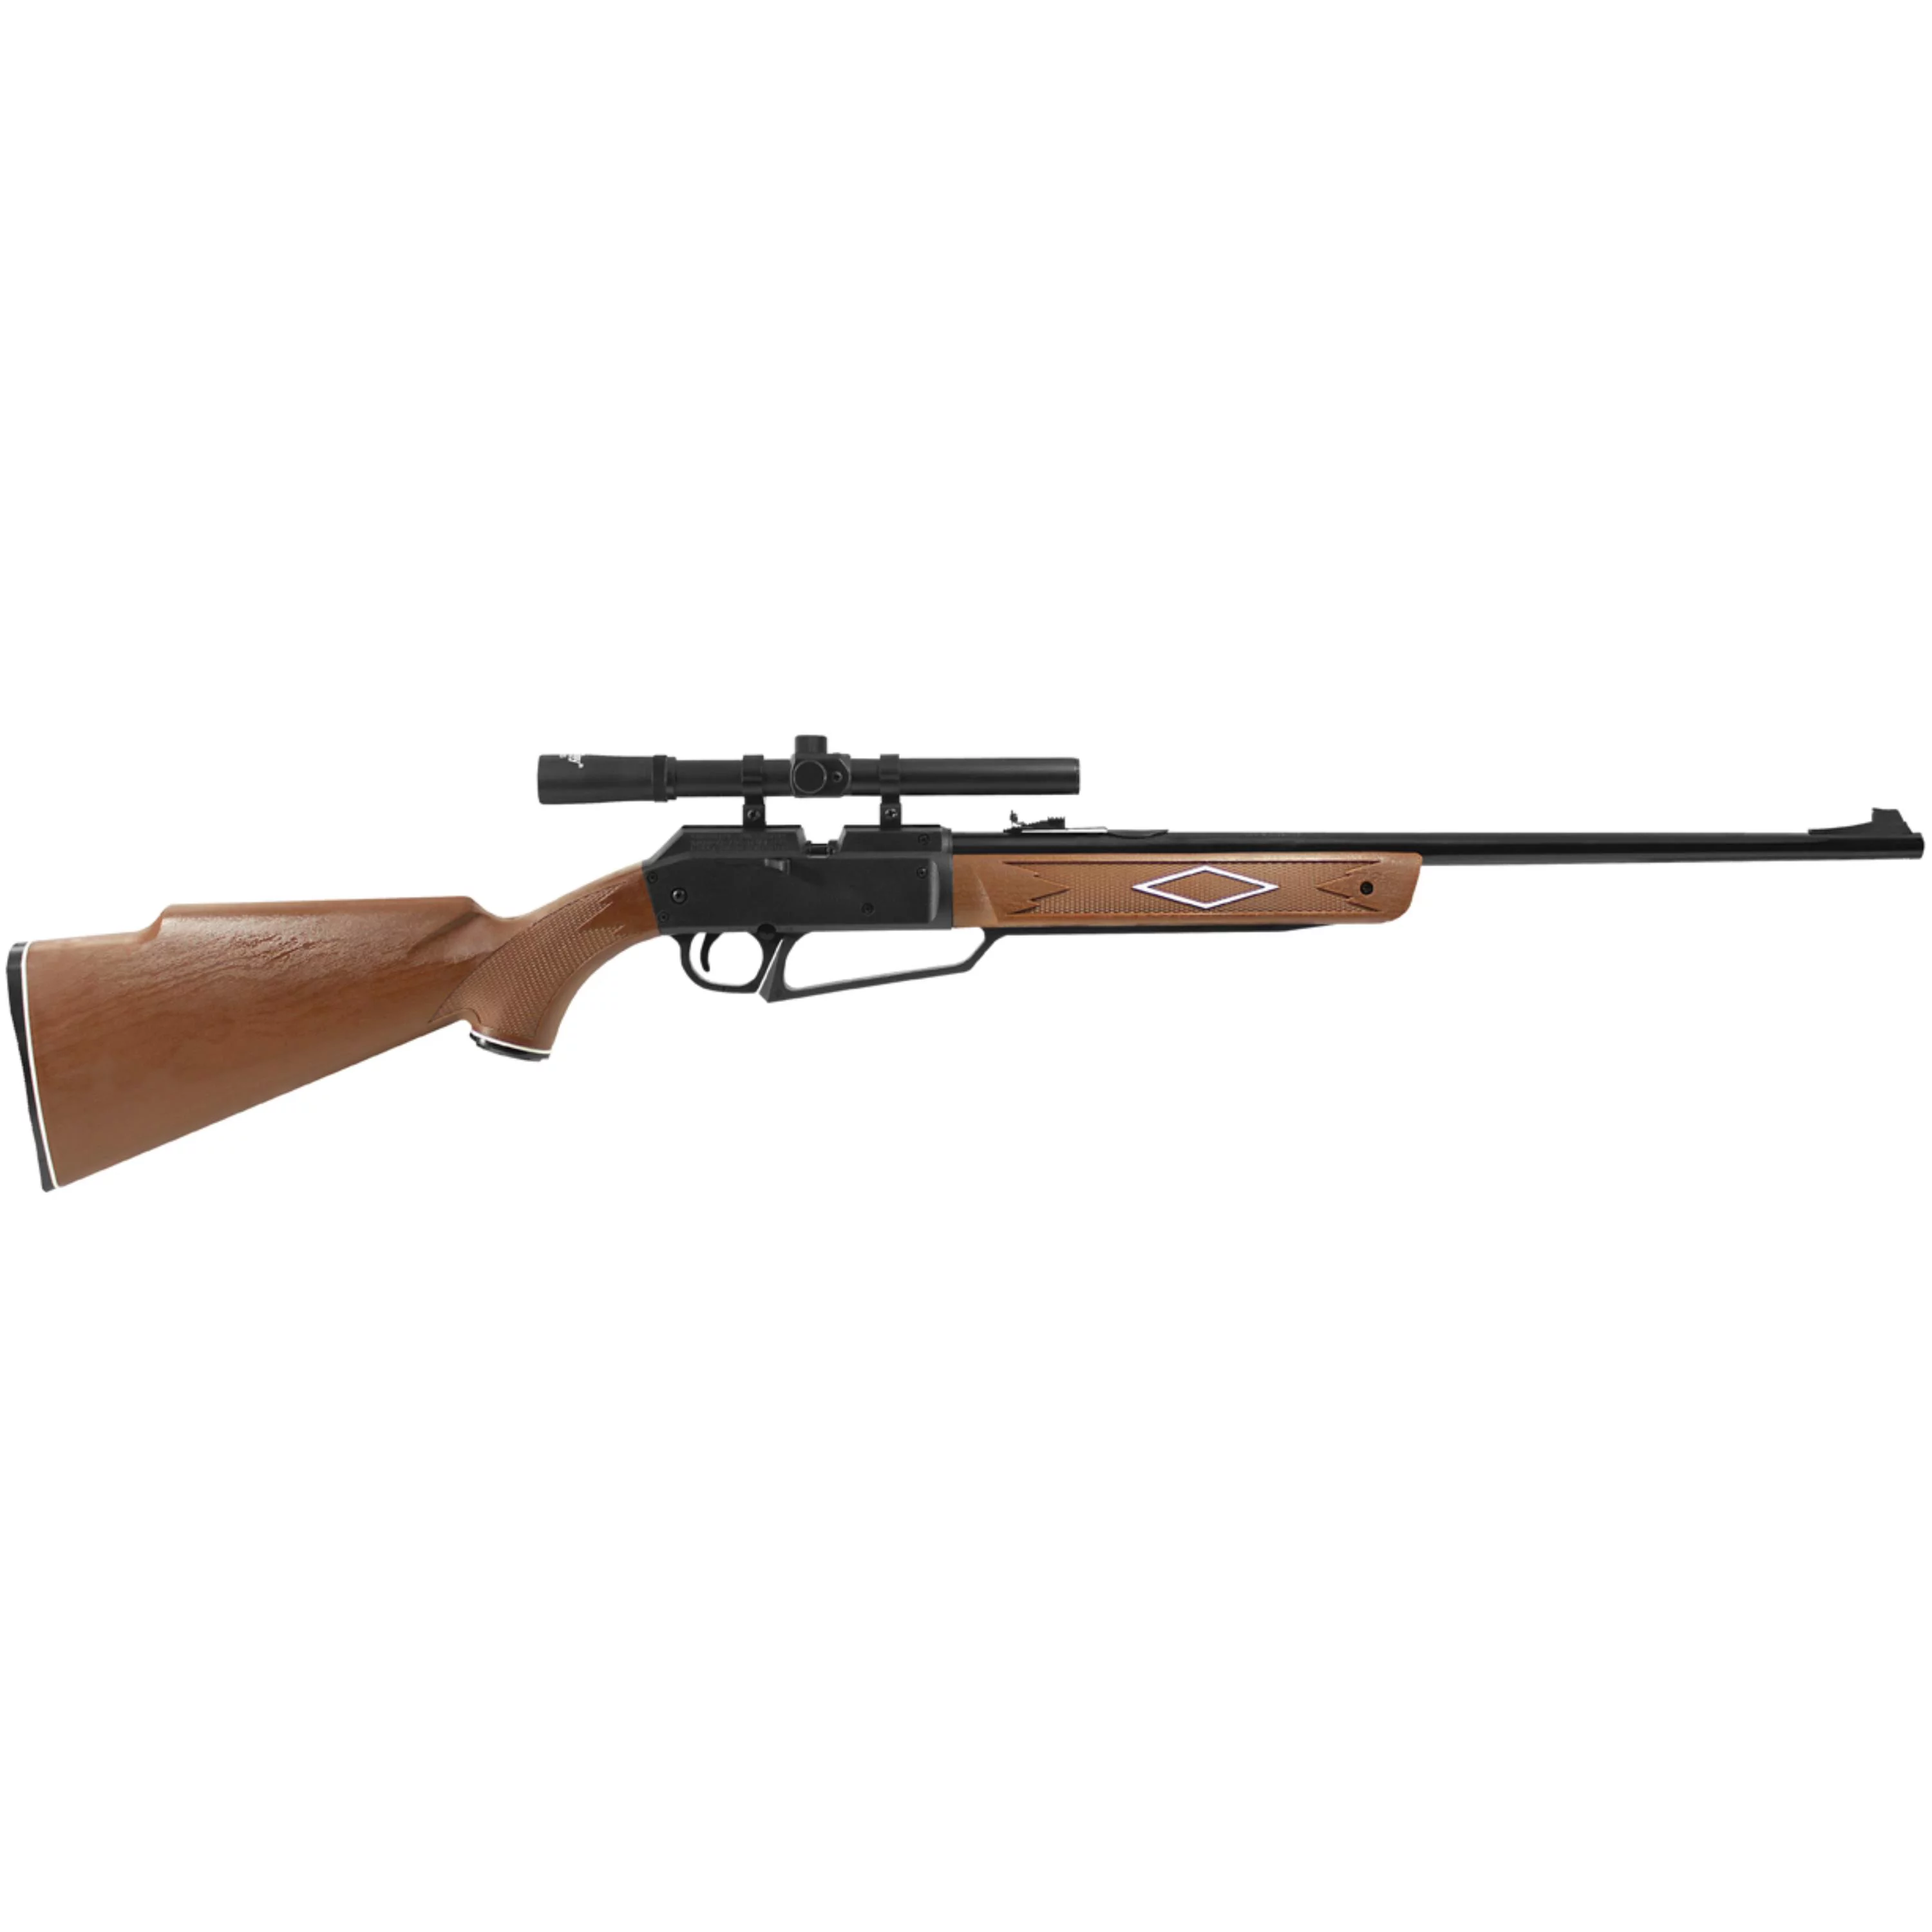 Daisy Powerline 880 Air Rifle with Scope, .177 Cal